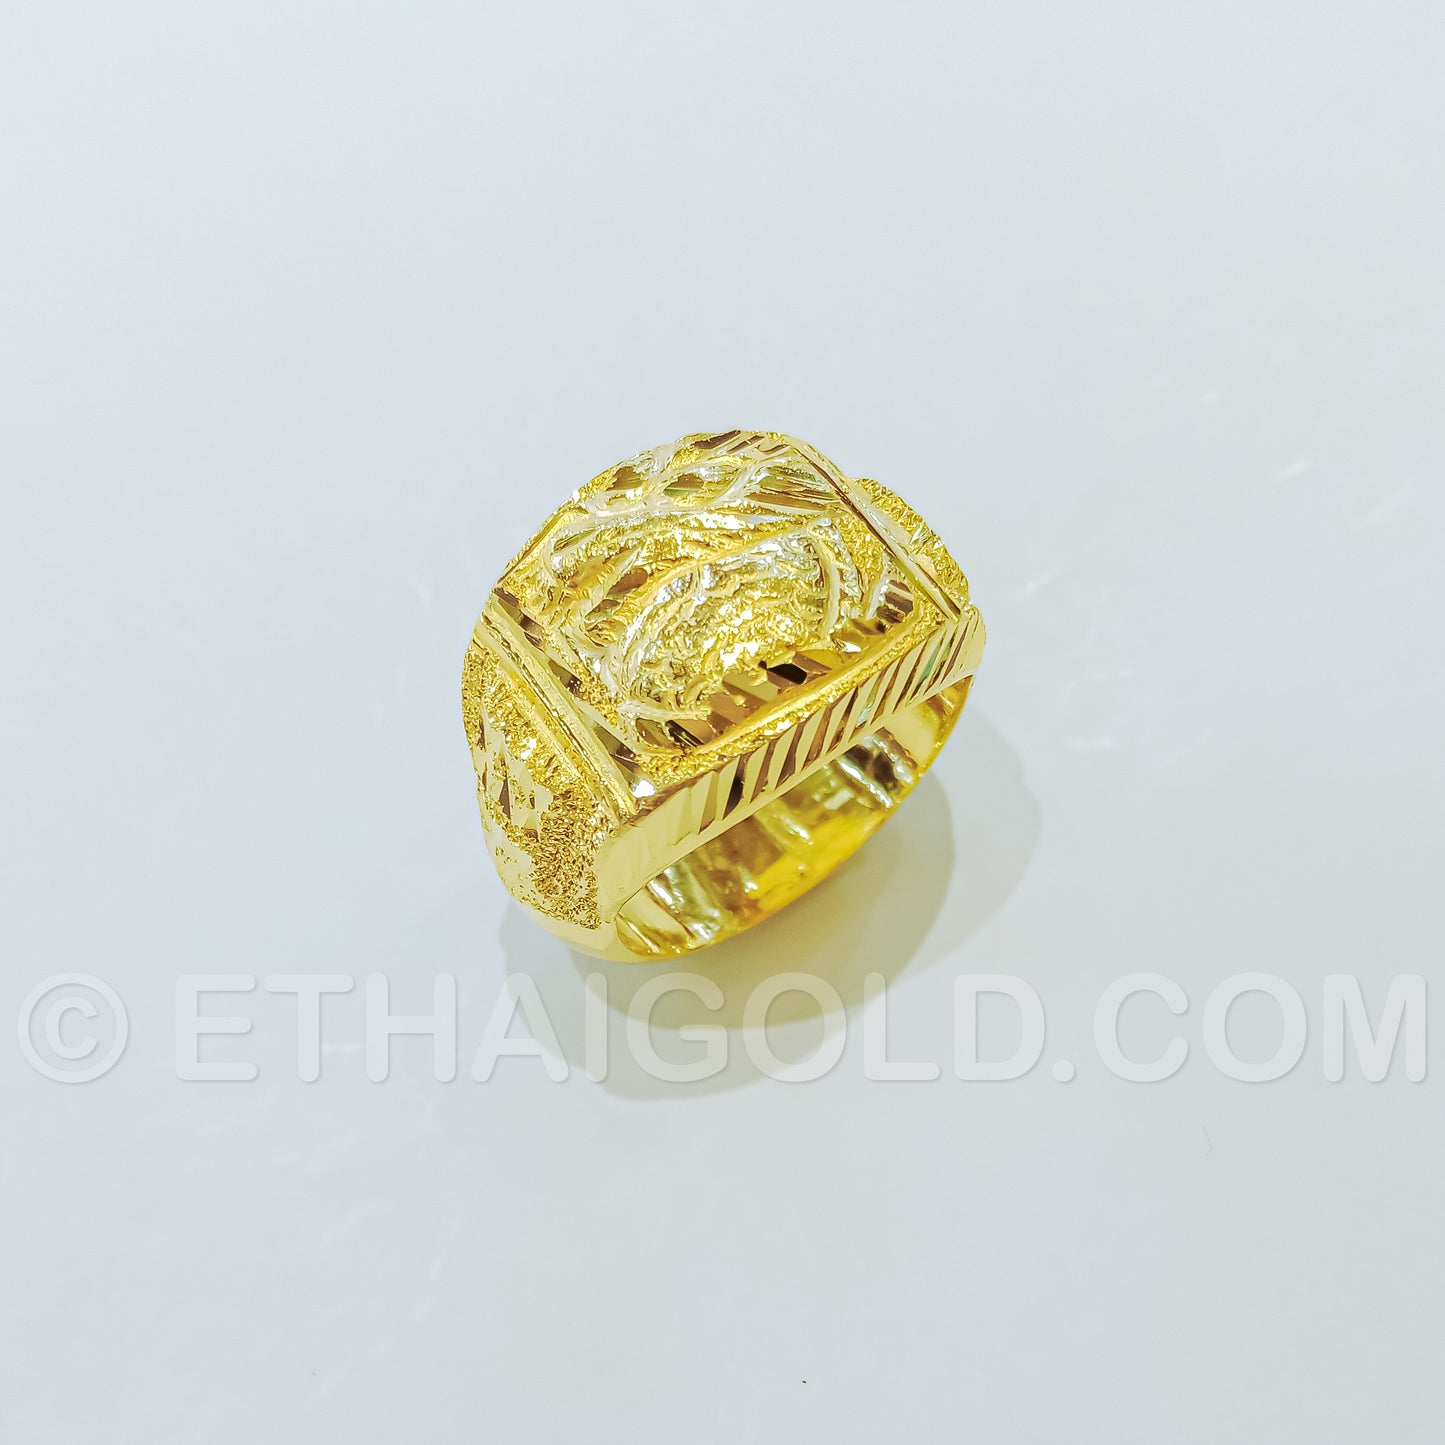 1/2 BAHT POLISHED SPARKLING DIAMOND-CUT HOLLOW SQUARE DRAGON RING IN 23K GOLD (ID: R1502S)